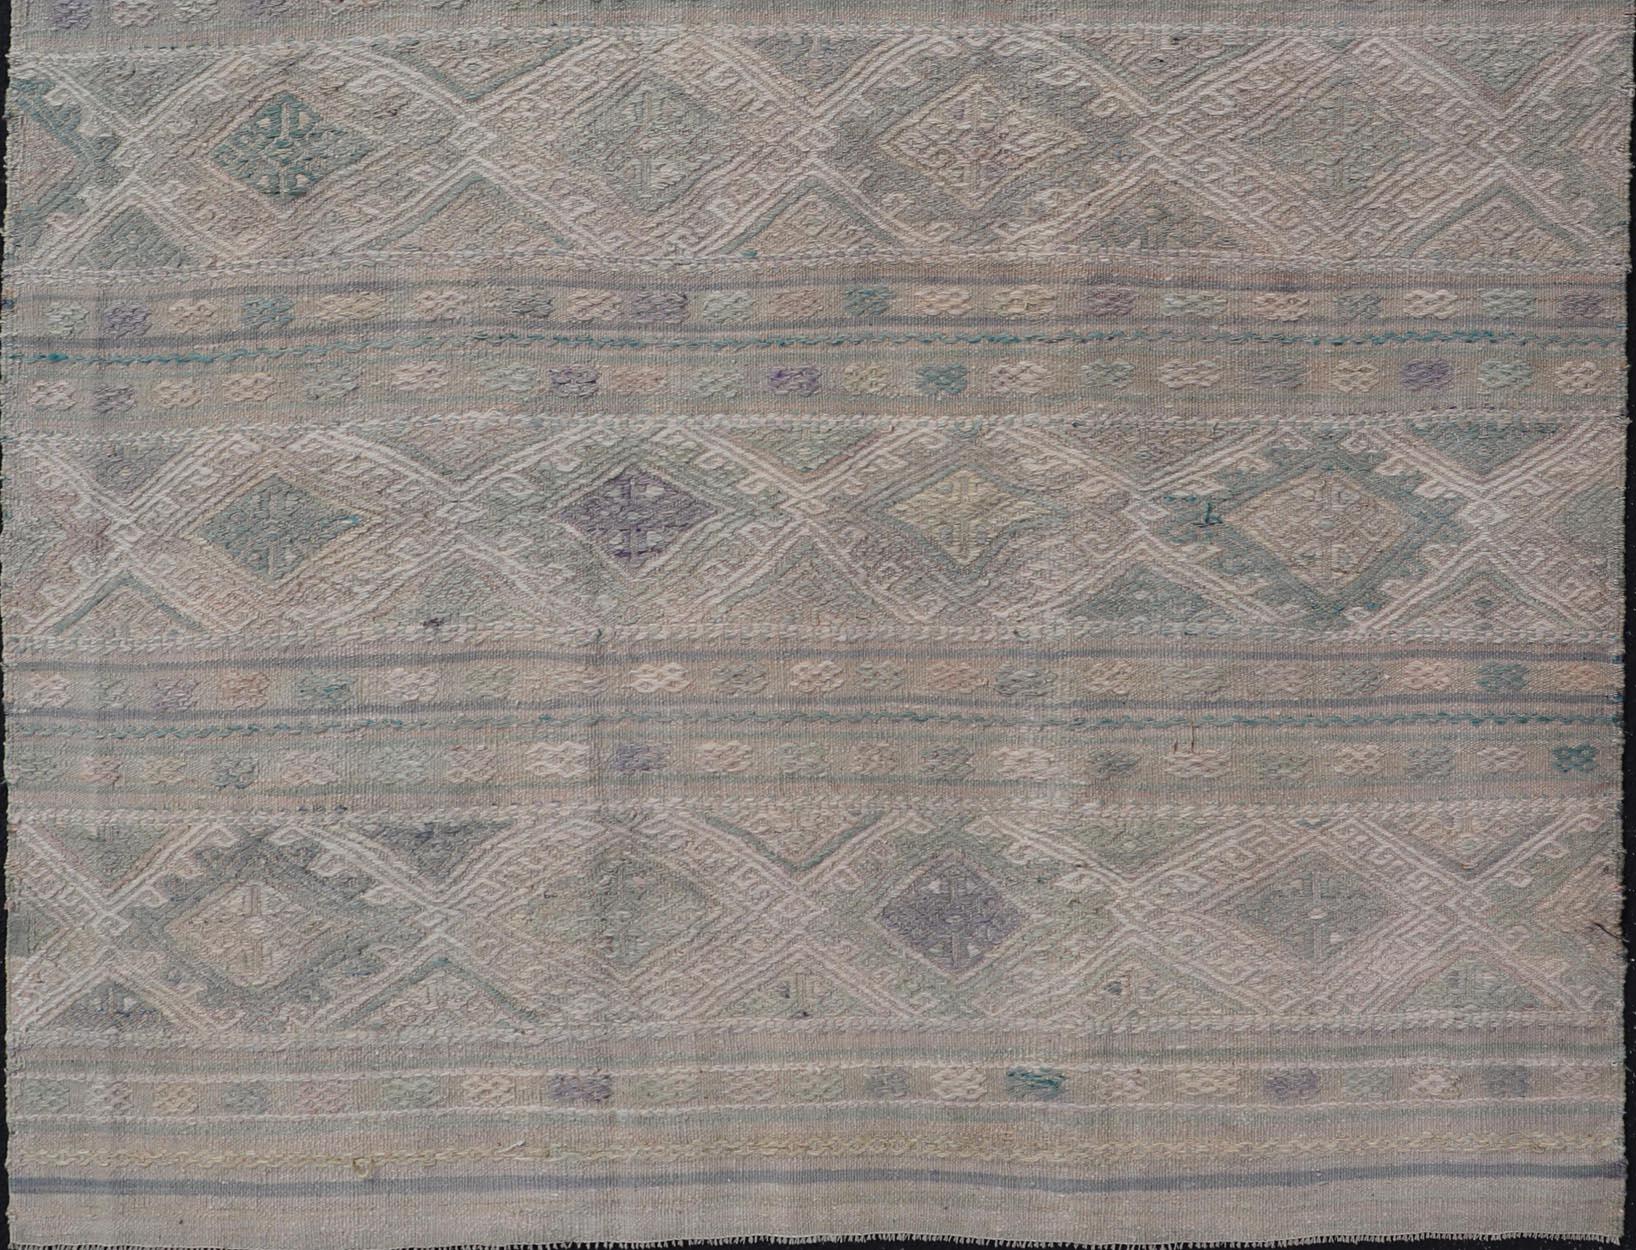 Vintage Turkish Flat-Weave Kilim with Stripes and Embroideries With Gray-Green For Sale 5